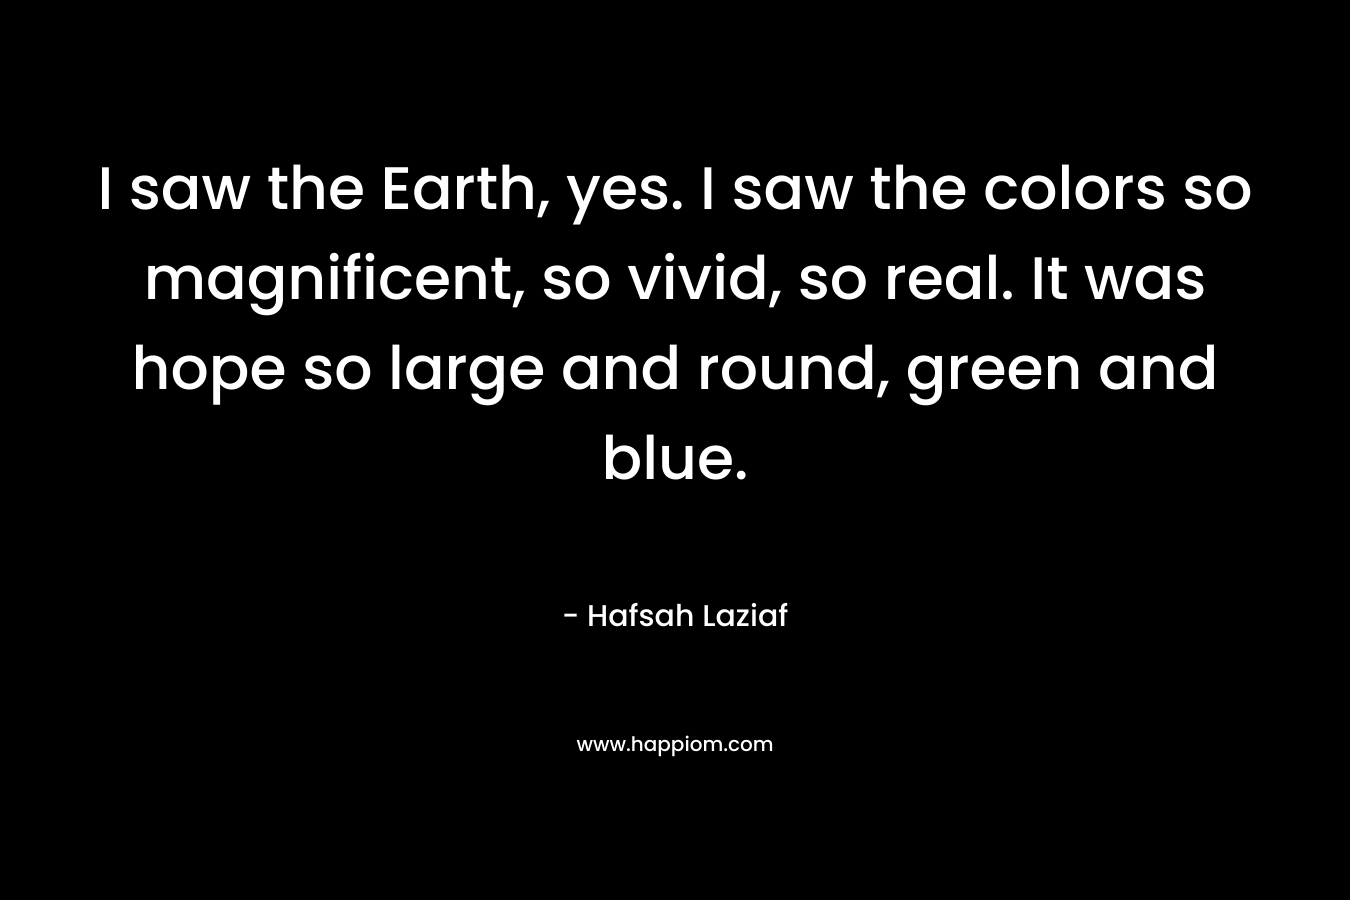 I saw the Earth, yes. I saw the colors so magnificent, so vivid, so real. It was hope so large and round, green and blue. – Hafsah Laziaf